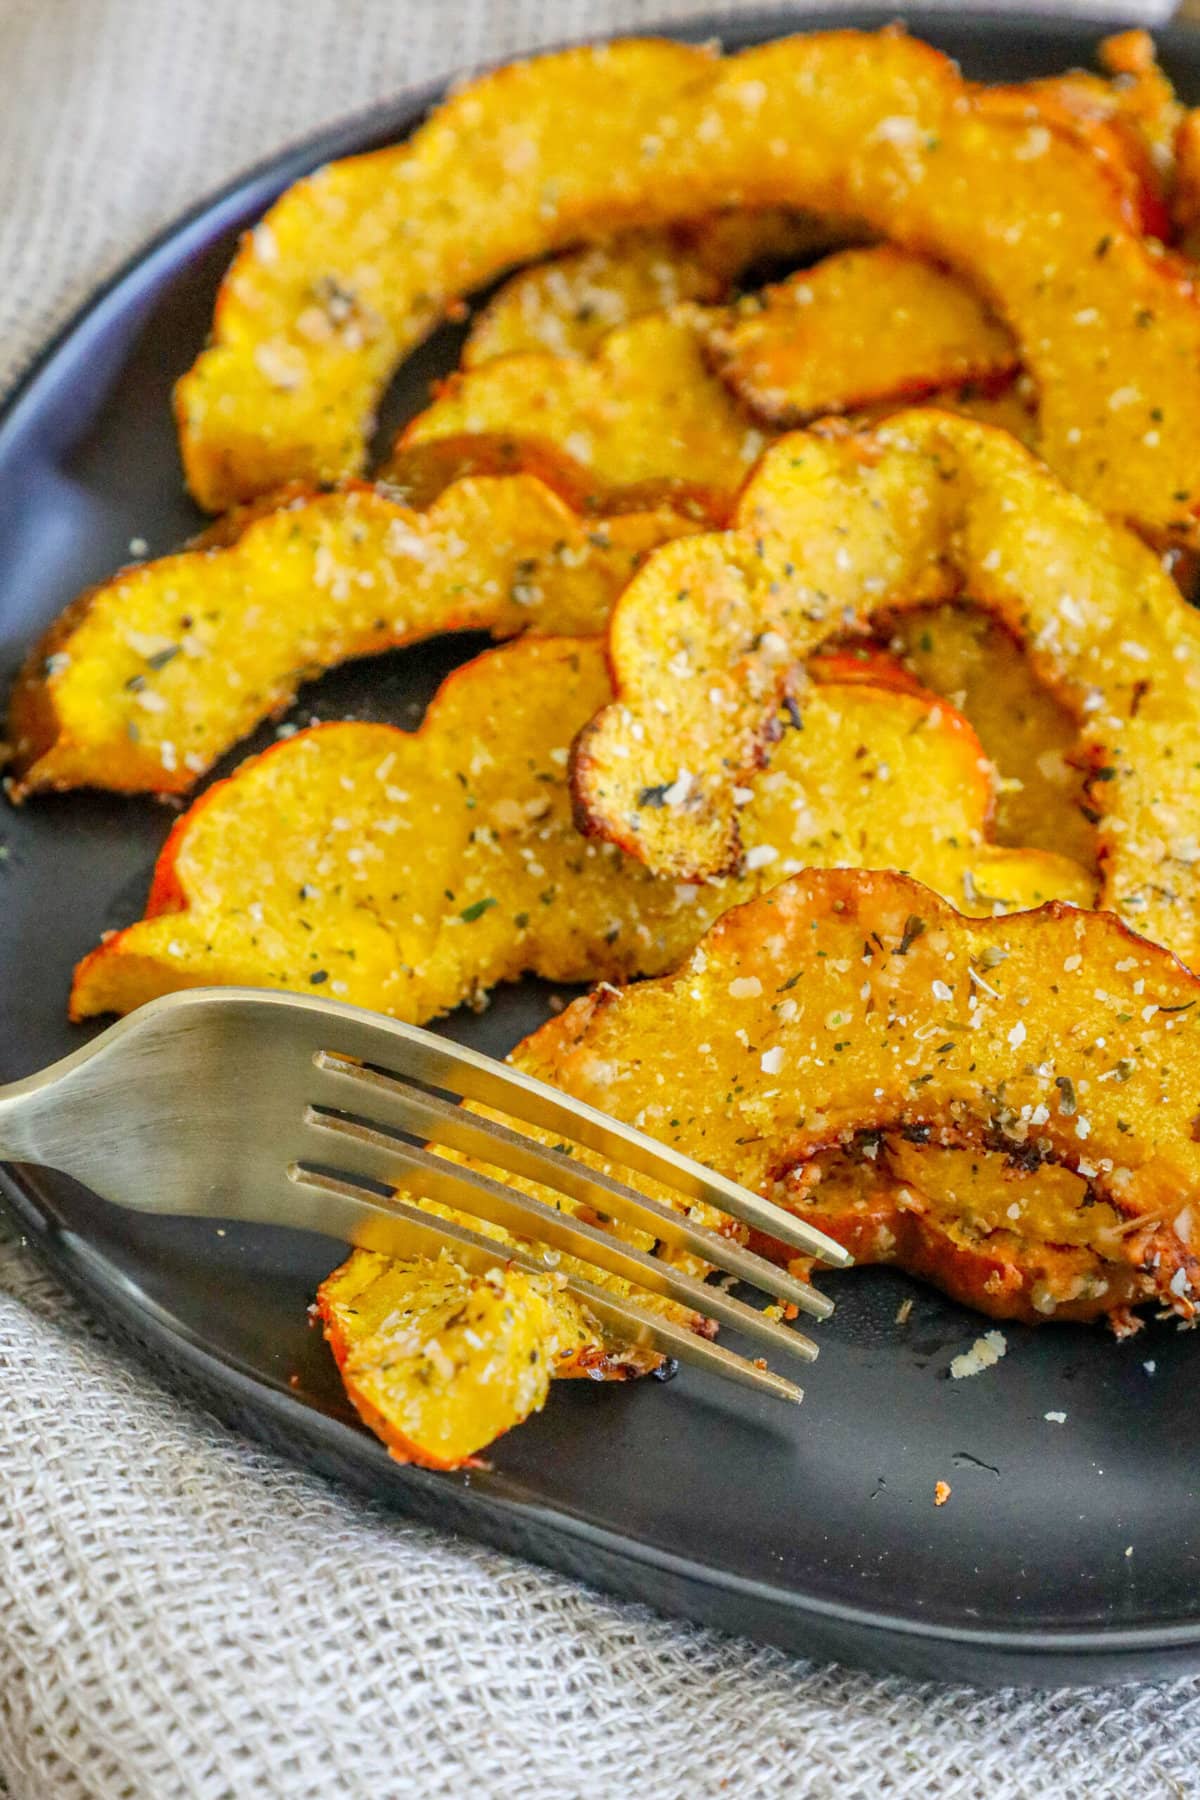 picture of roasted acorn squash slices seasoned with herbs and spices on a black plate